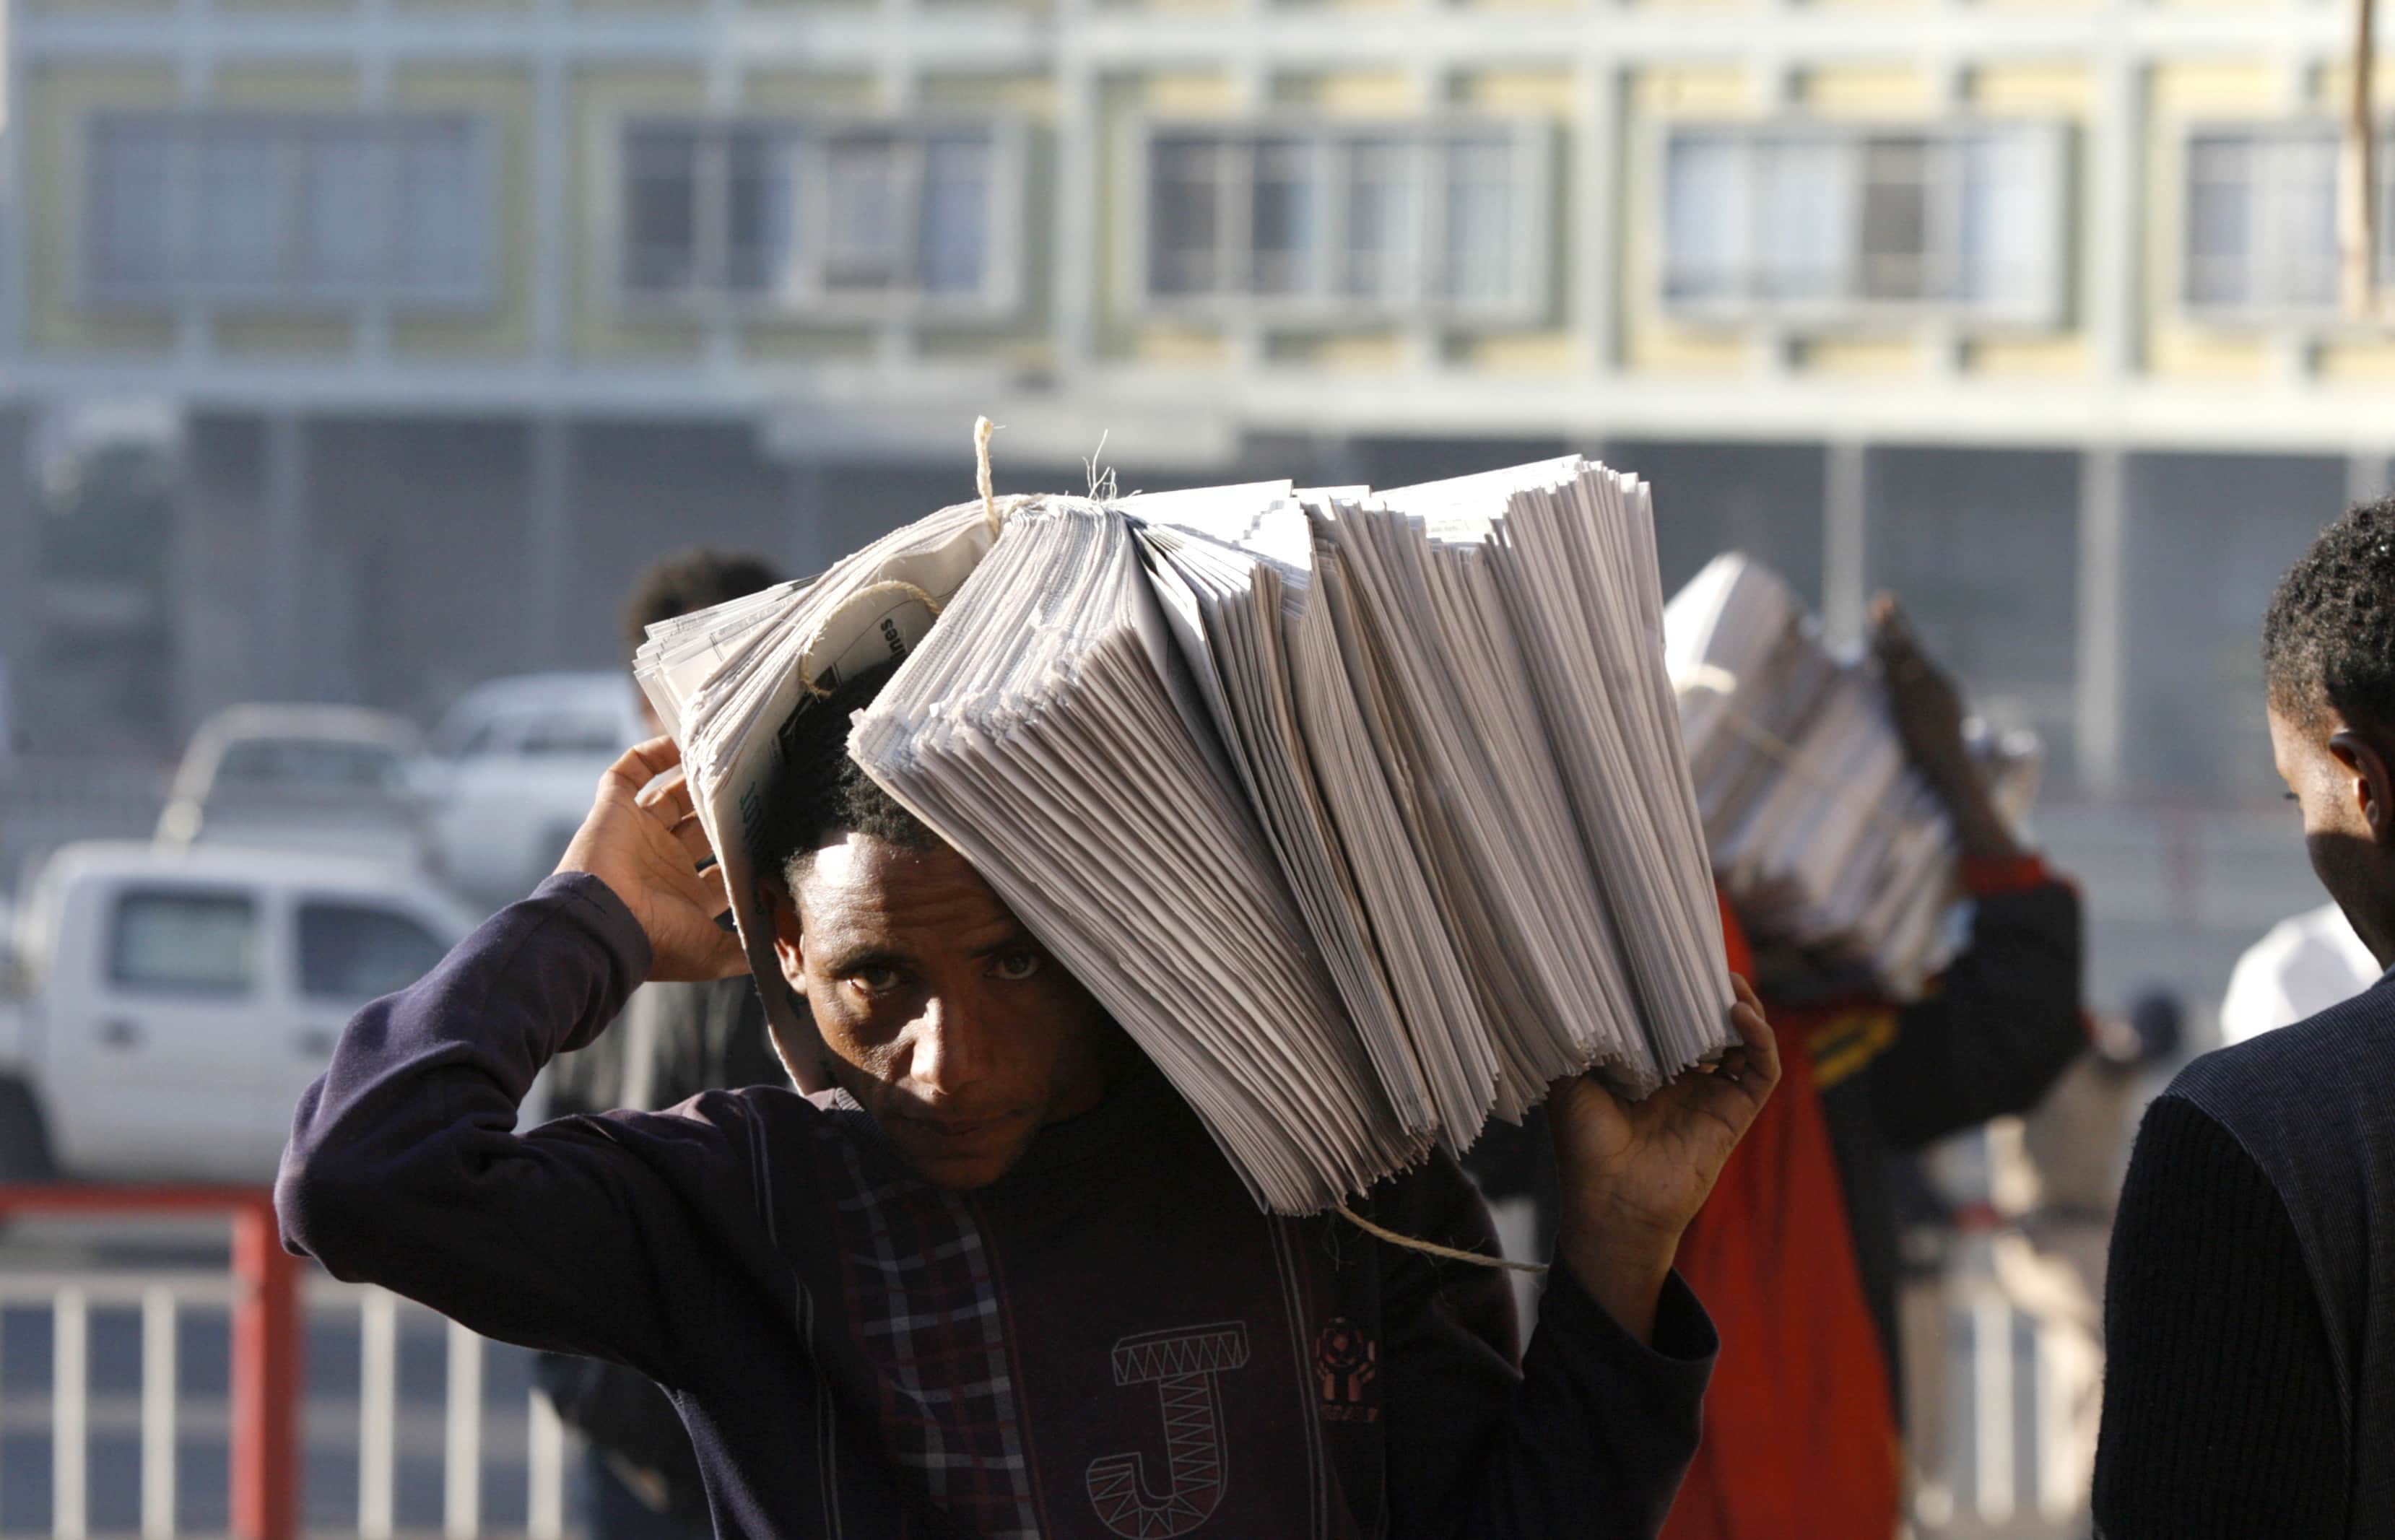 Vendors carry piles of newspapers along a street in Addis Ababa, Reuters/Thomas Mukoya